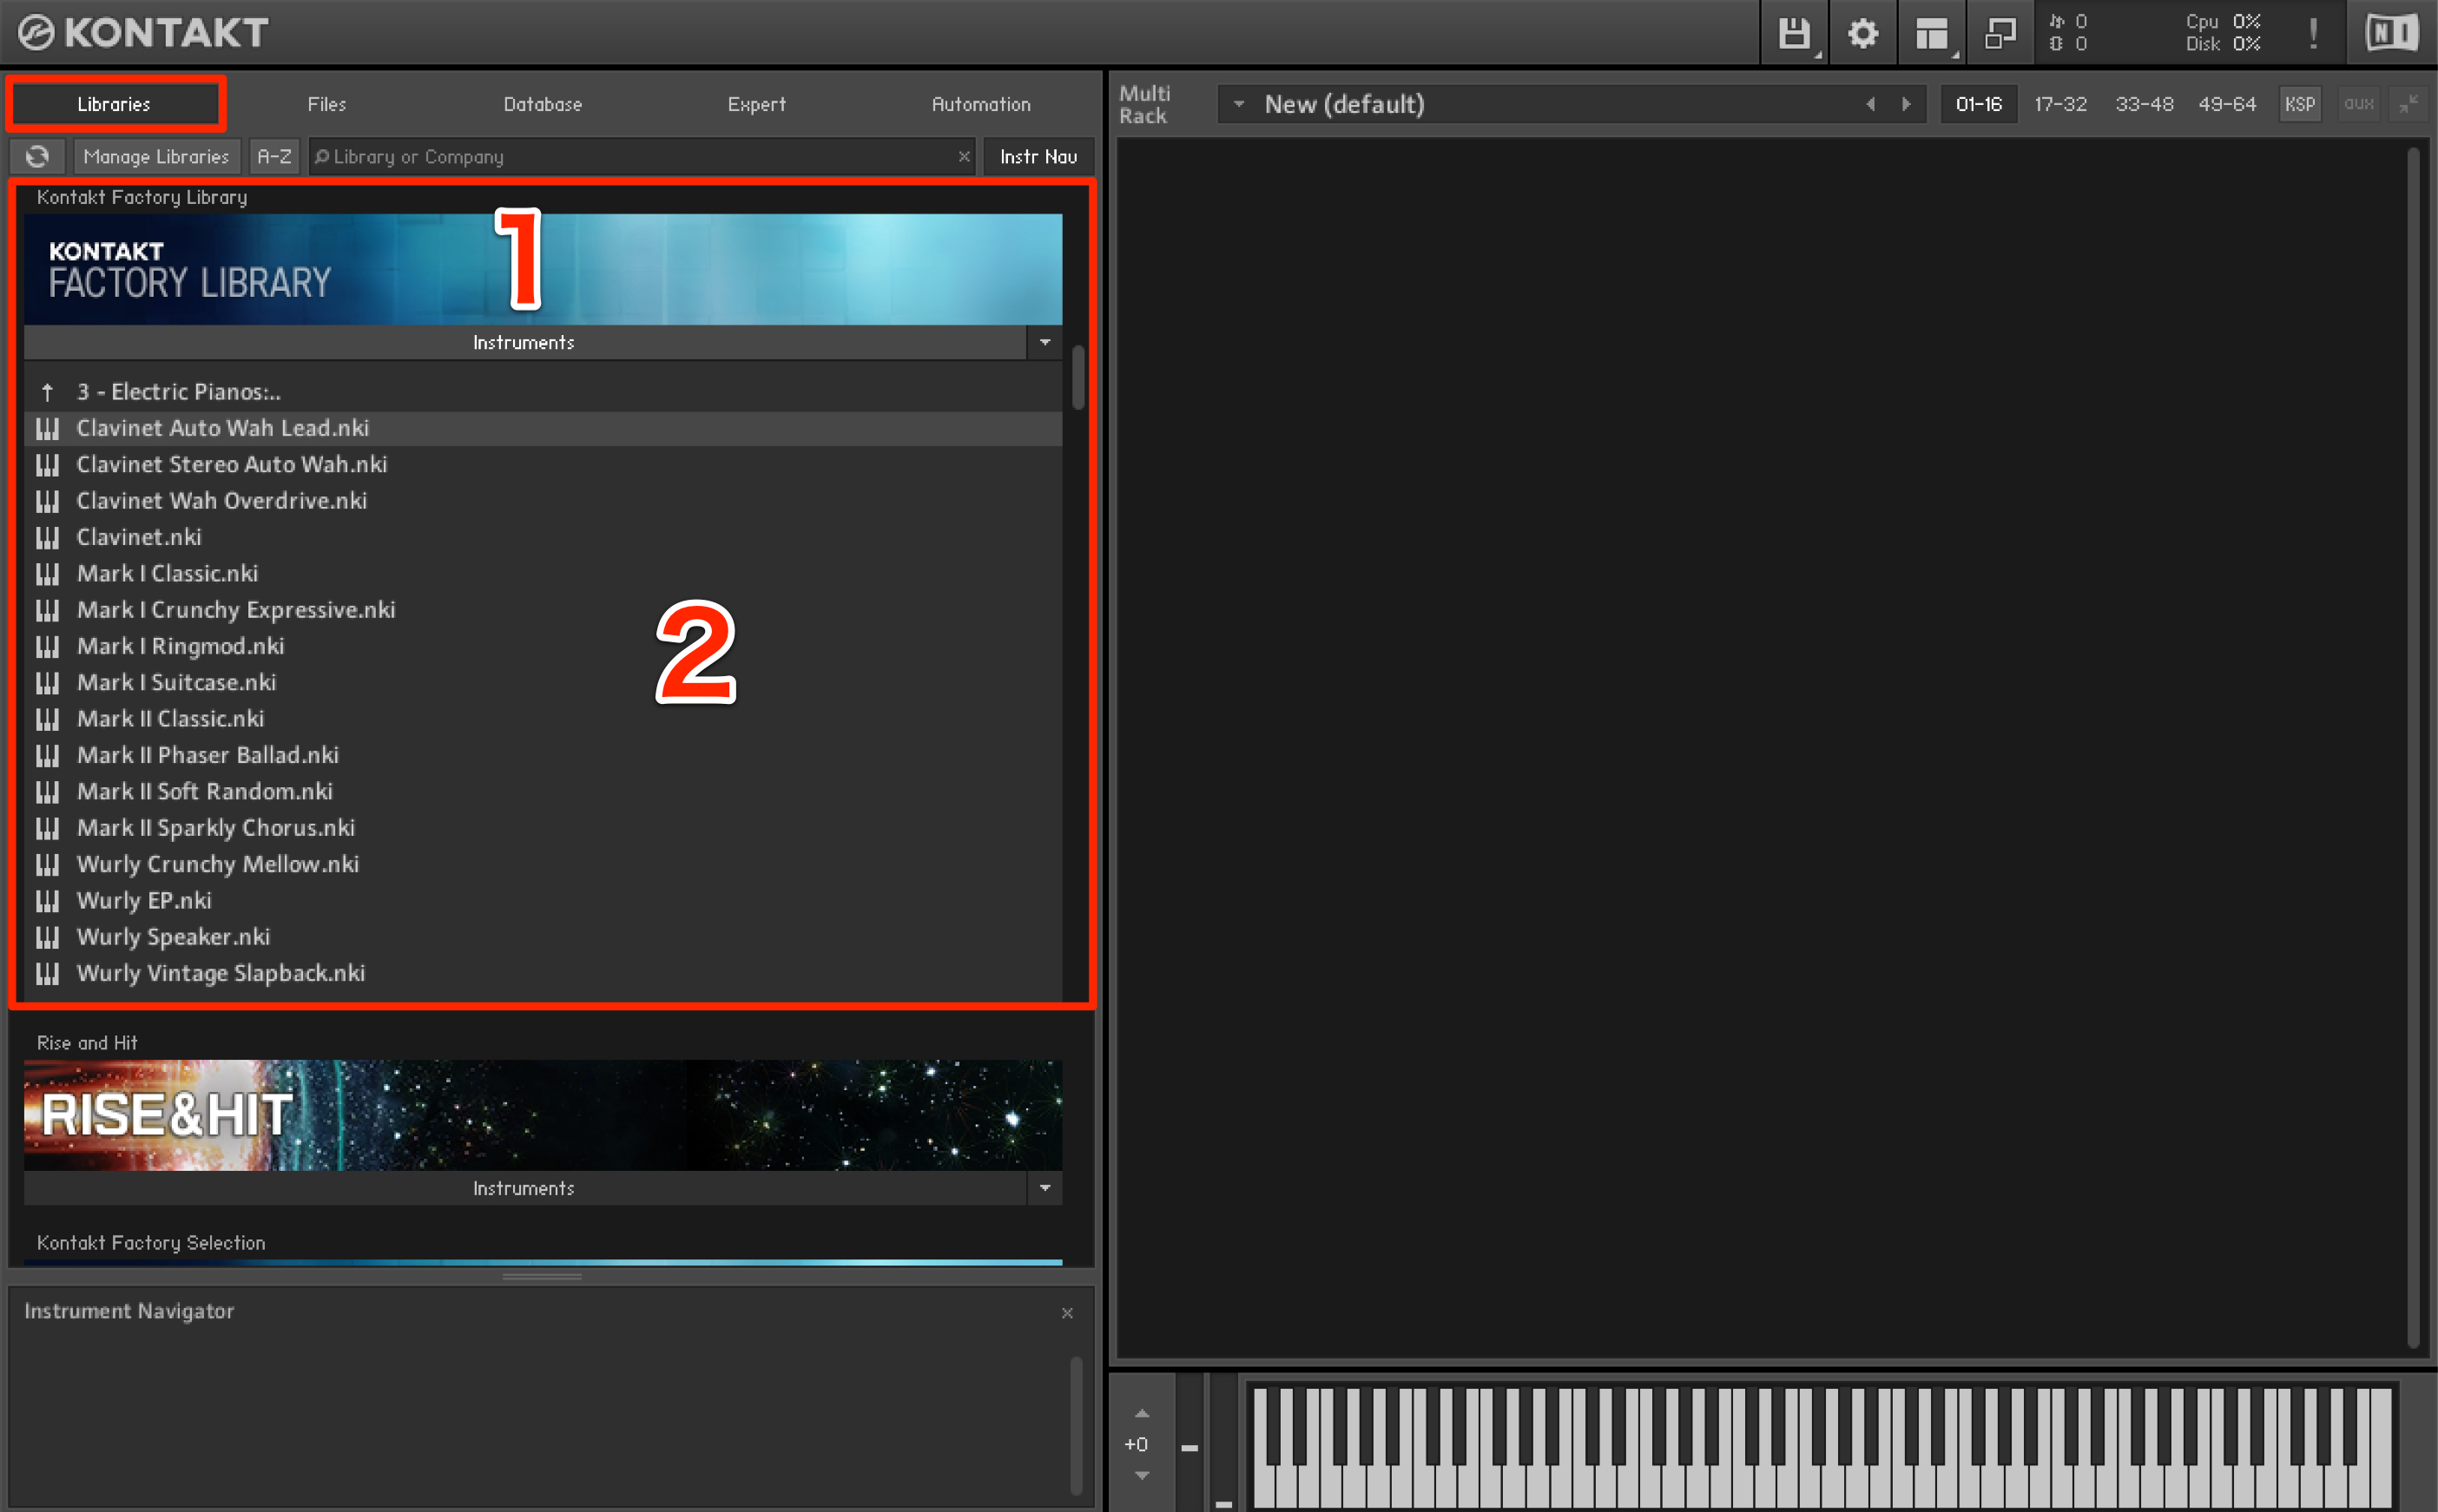 kontakt factory library how good is